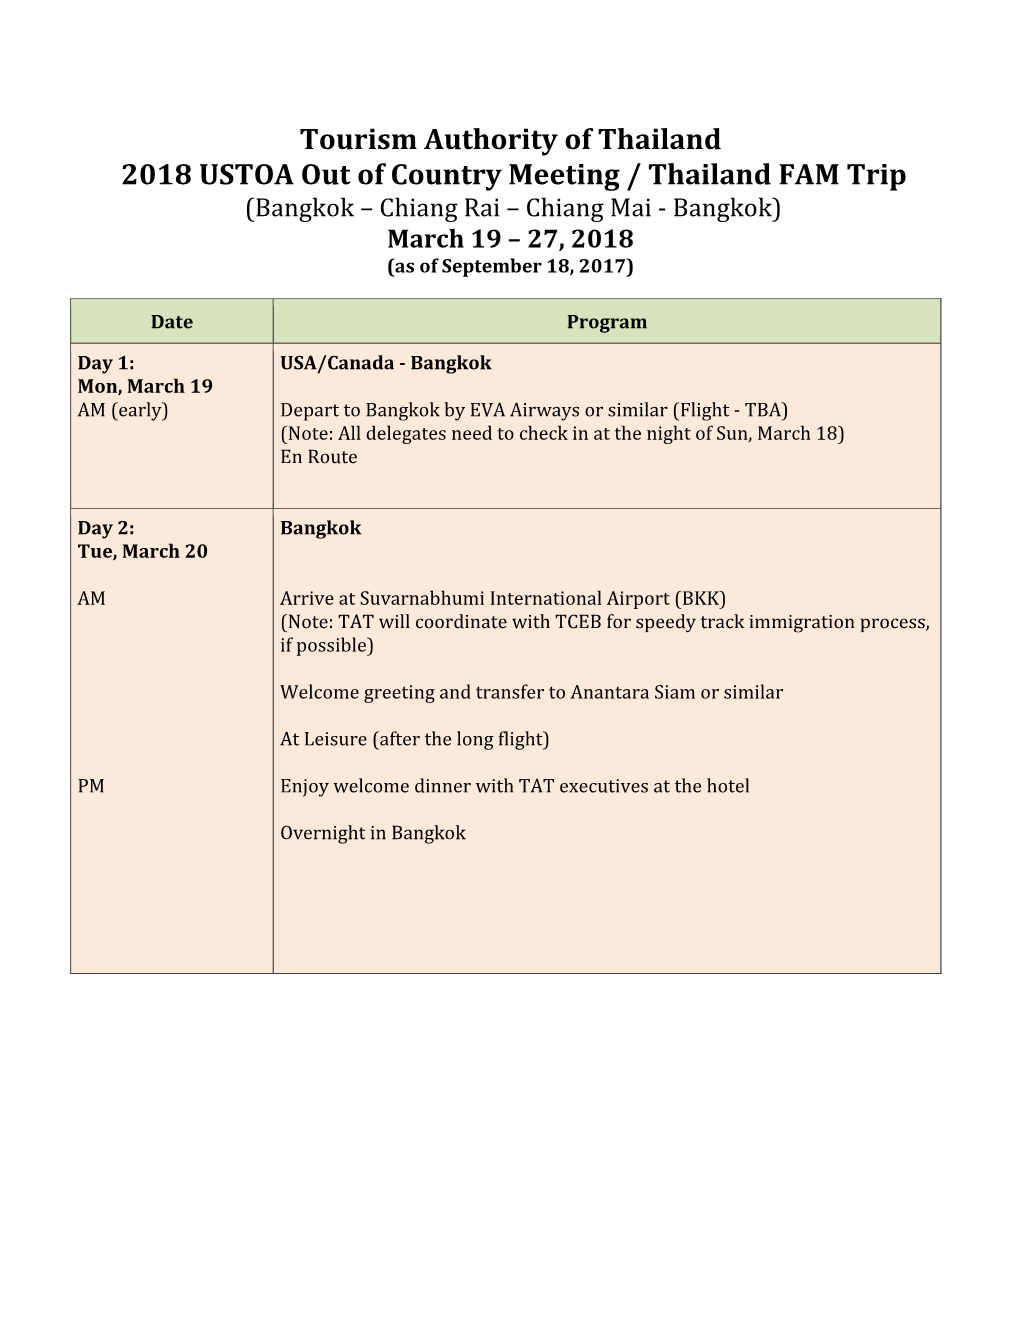 Tourism Authority of Thailand 2018 USTOA out of Country Meeting